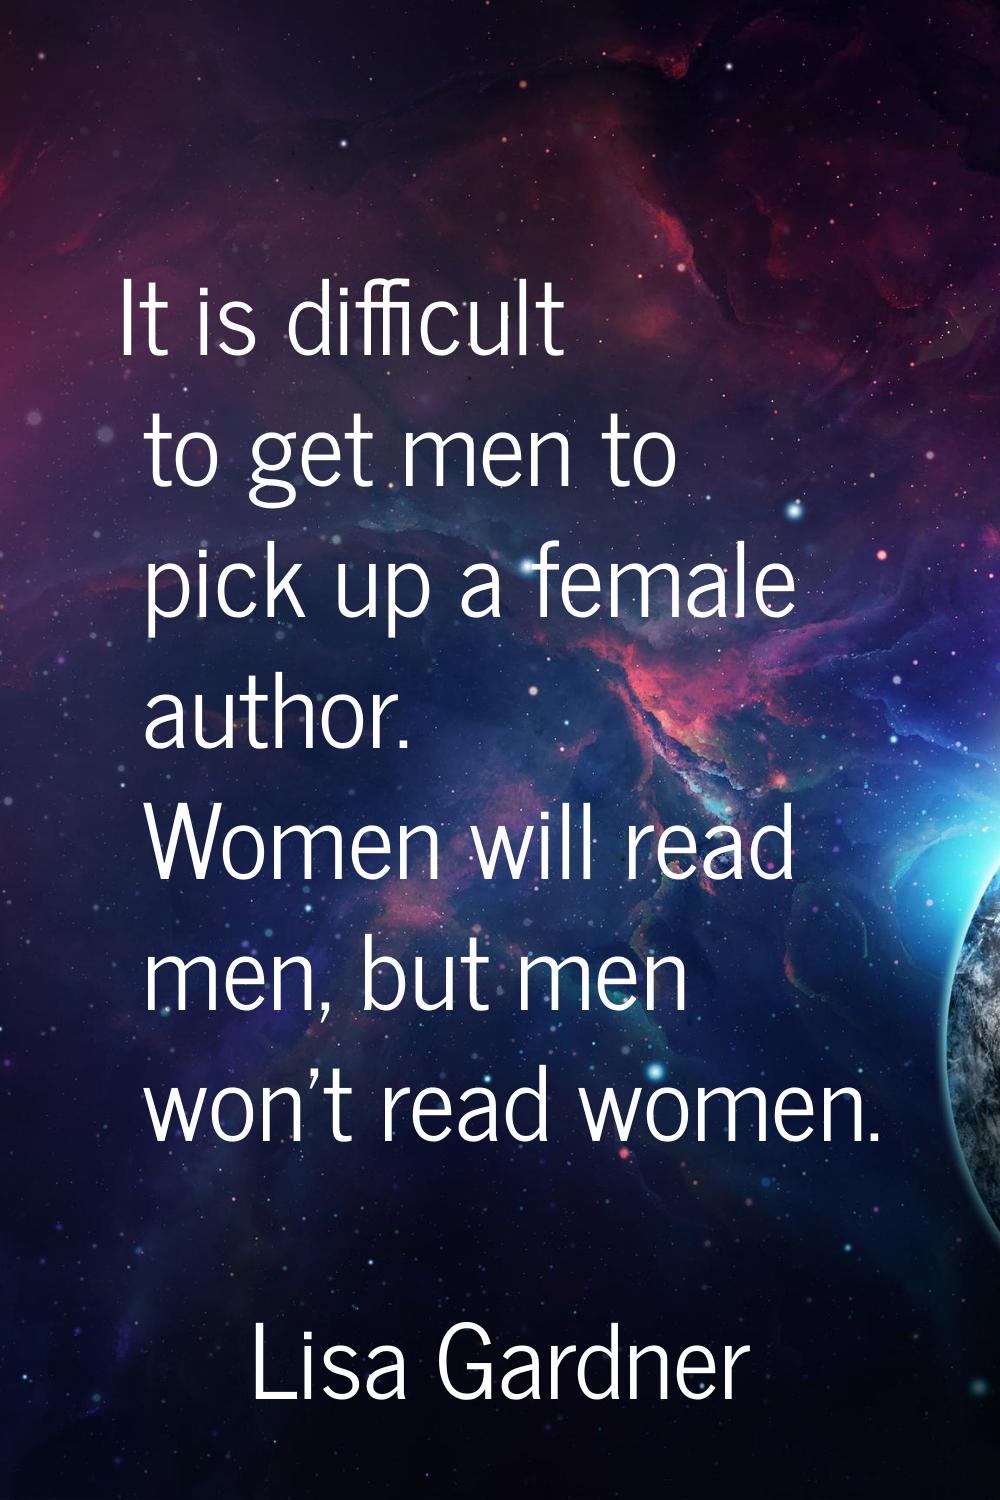 It is difficult to get men to pick up a female author. Women will read men, but men won't read wome